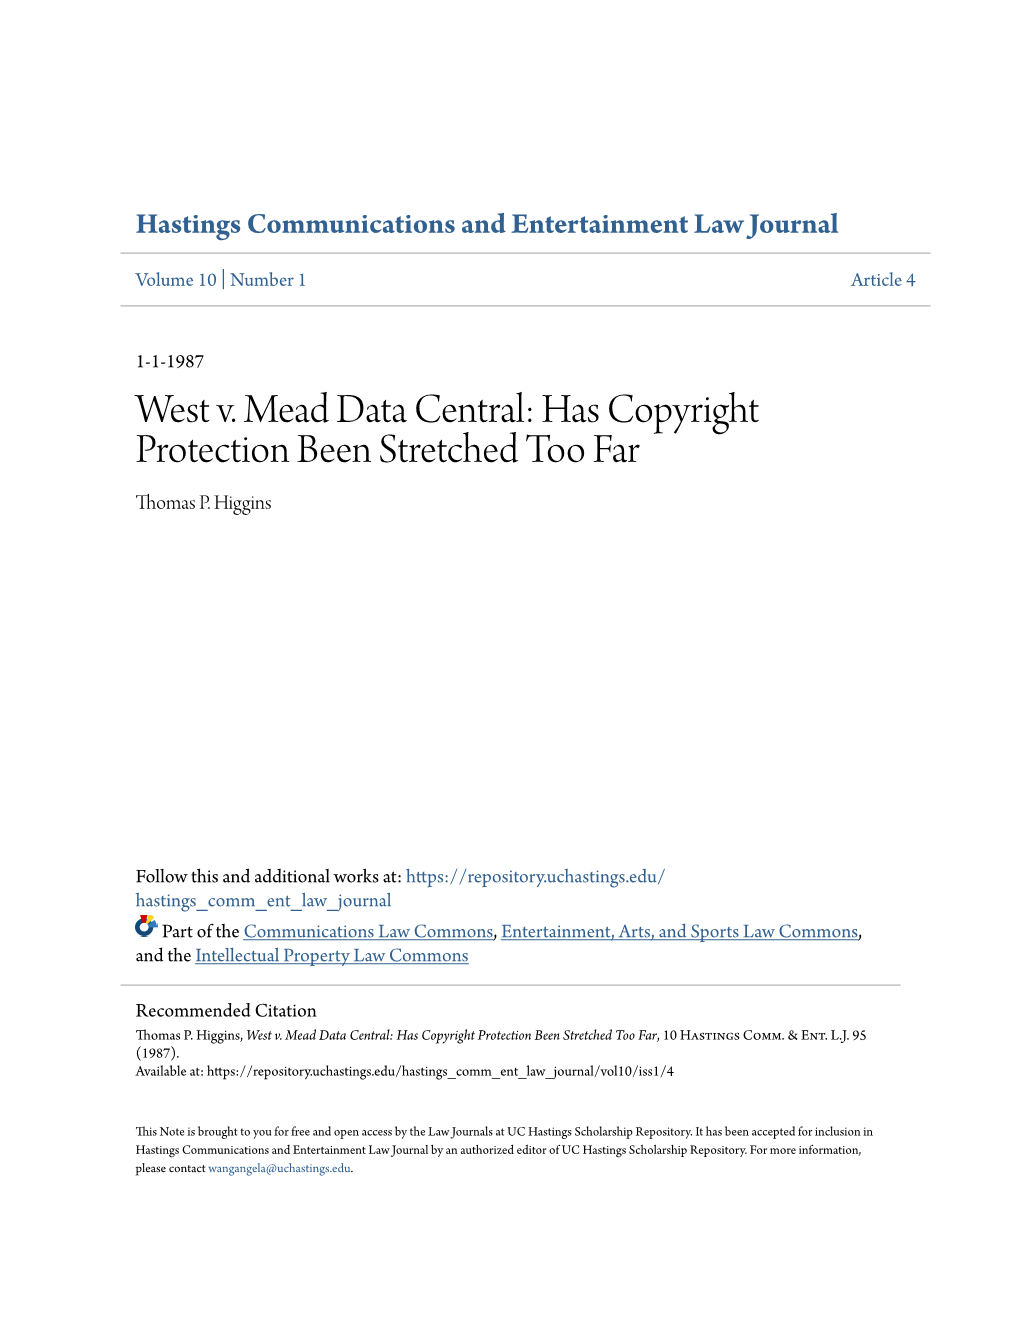 West V. Mead Data Central: Has Copyright Protection Been Stretched Too Far Thomas P